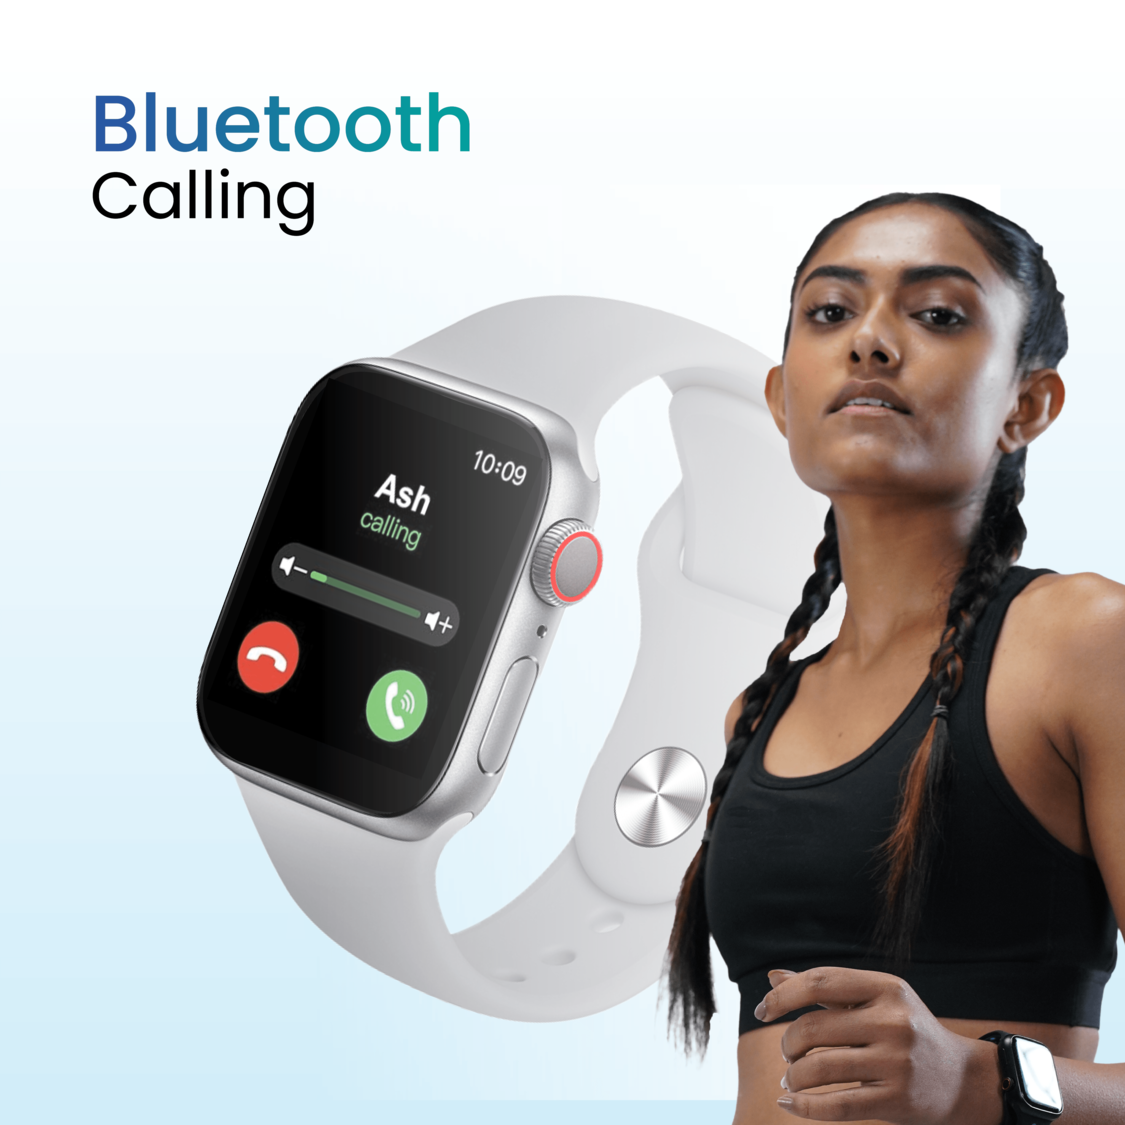 Younggear sky smartwatch with bluetooth caliing